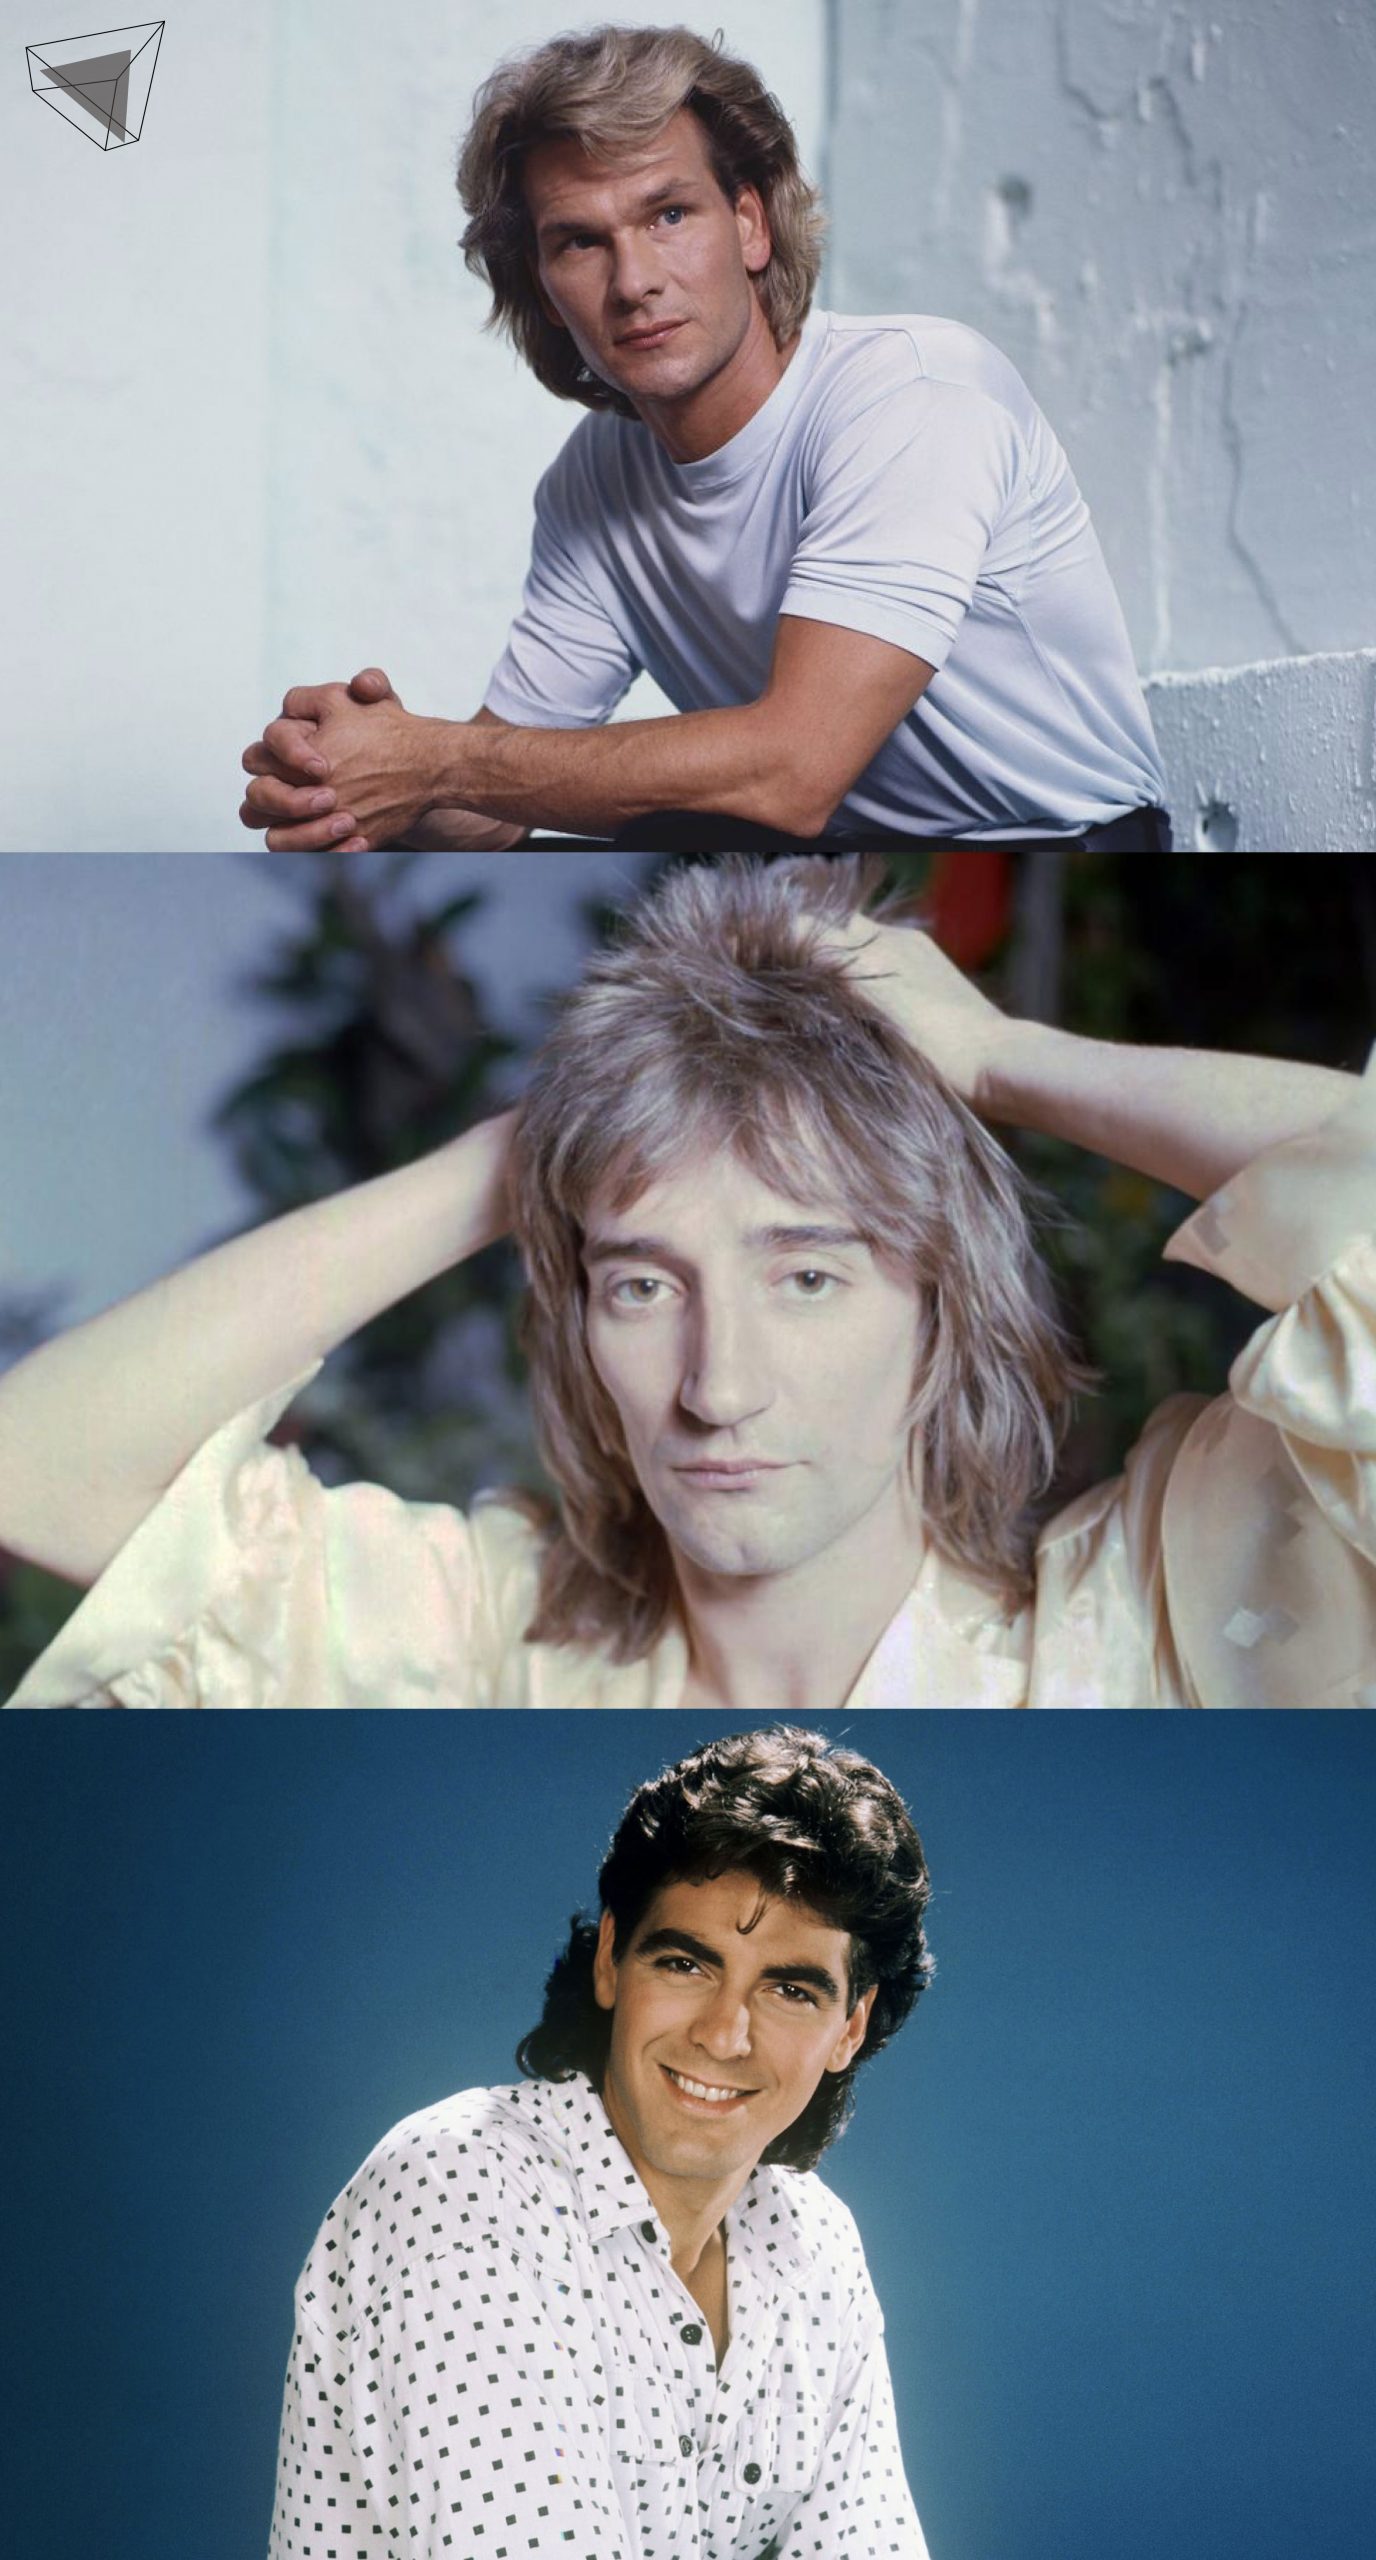 Patrick Swayze, Rod Stewart and George Clooney with Mullet hair